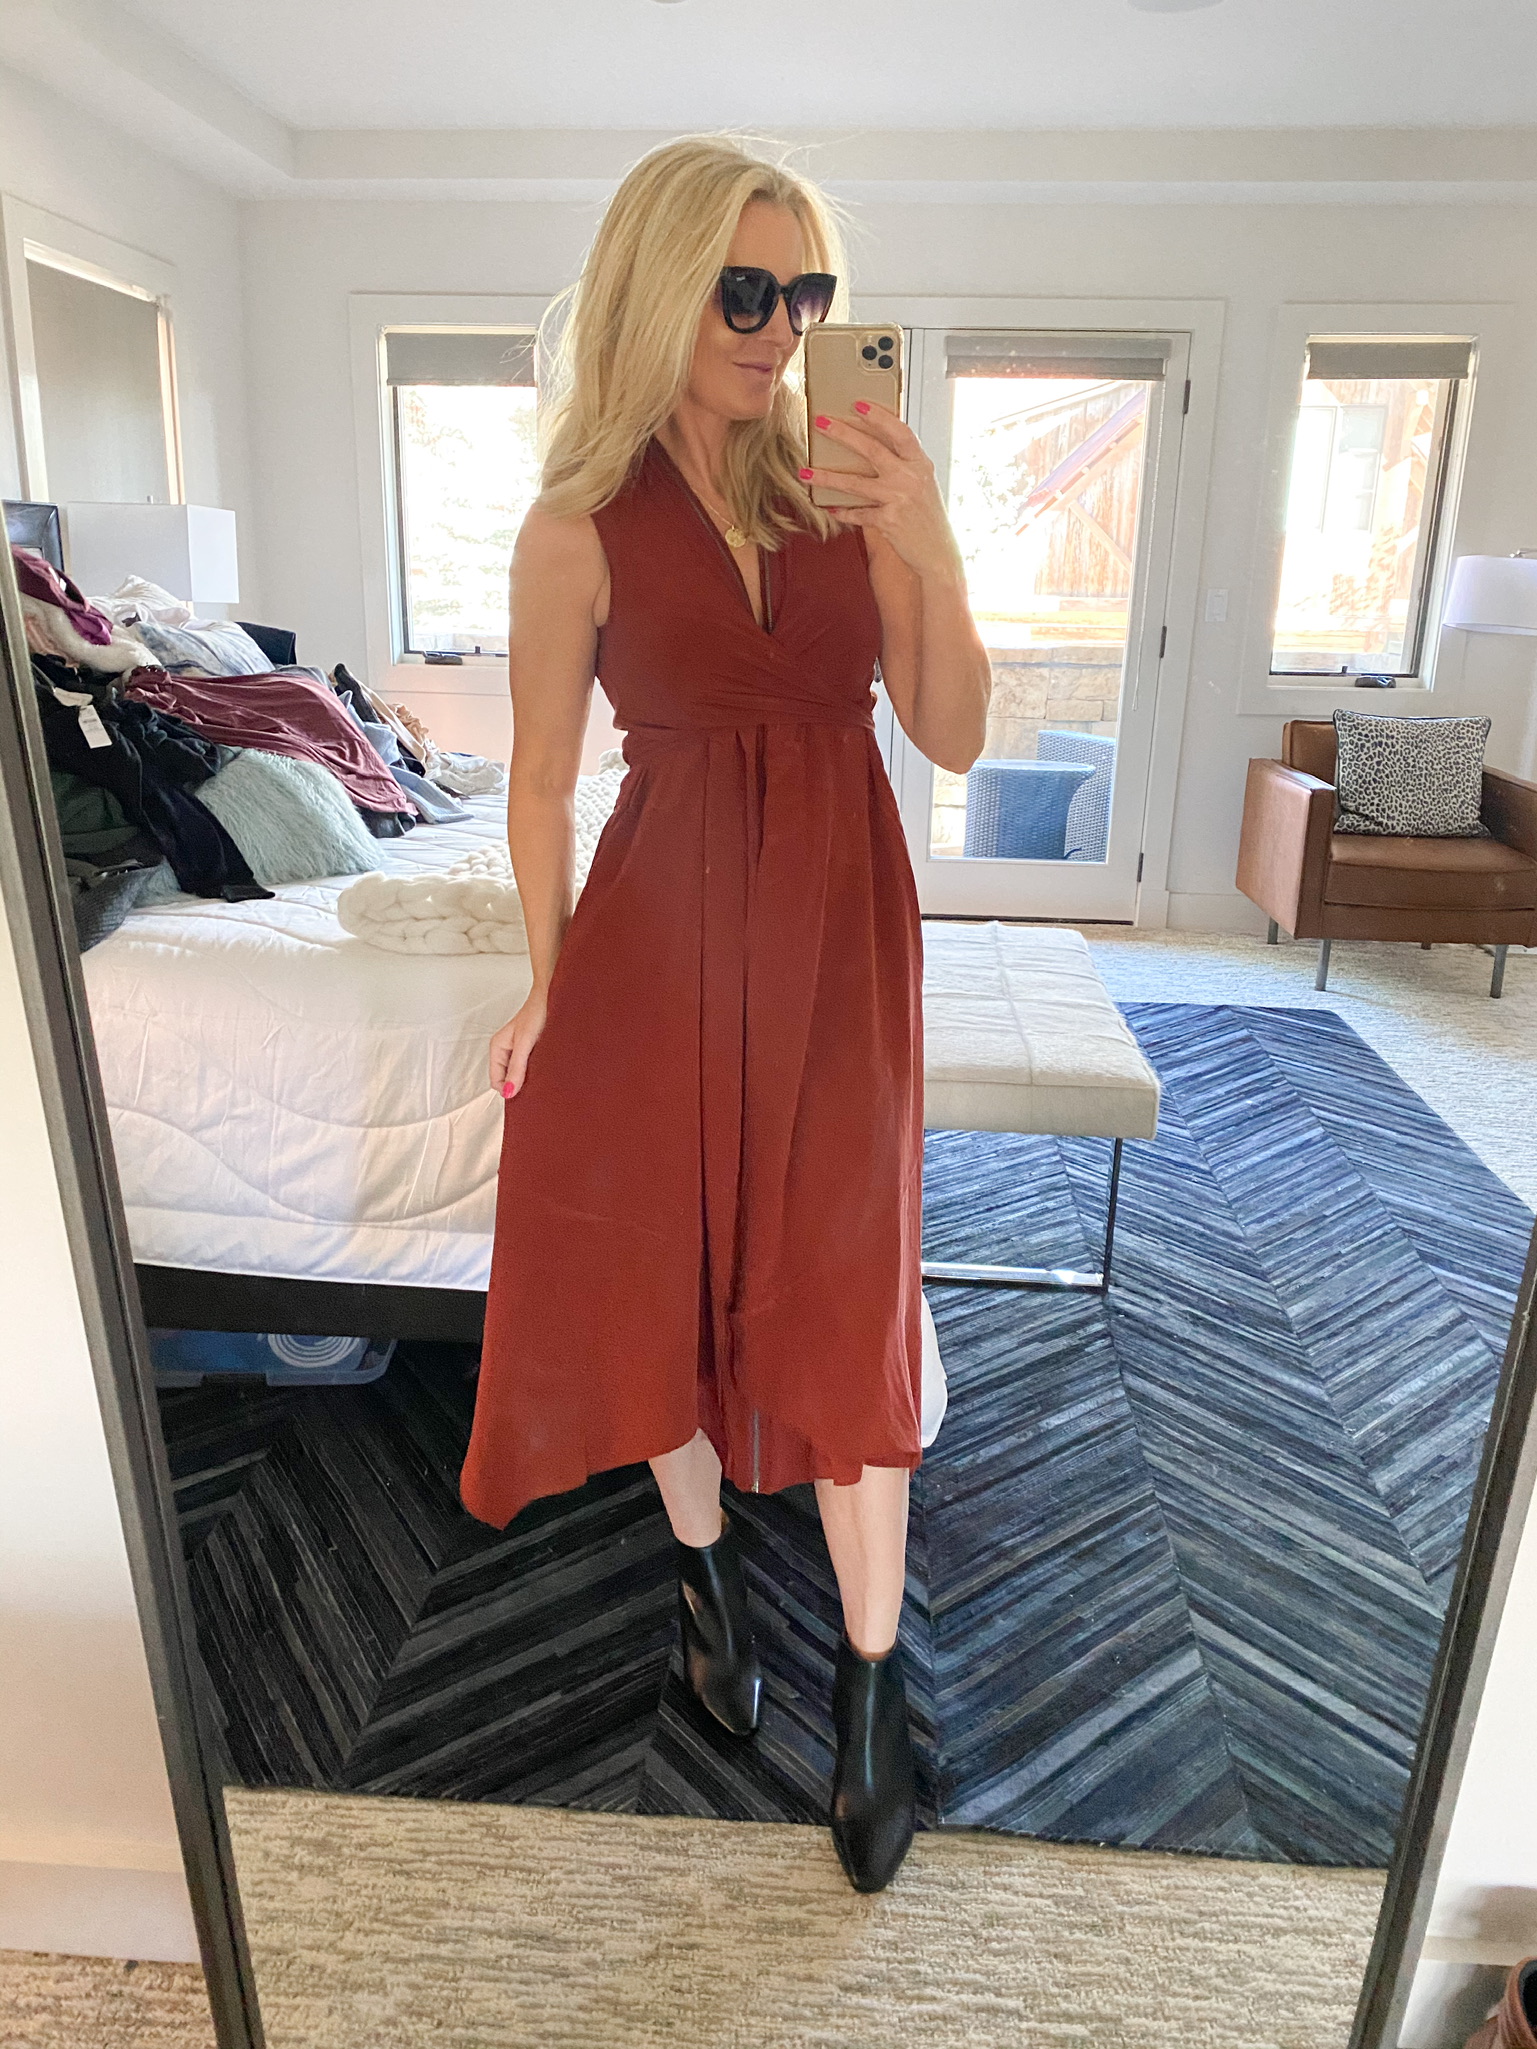 Nordstrom Sale Favorites, Fashion Blogger Erin Busbee Of Busbee Style Wearing A Rust Red Colored Zip Front Dress By Allsaints With Black Booties In Telluride, Colorado